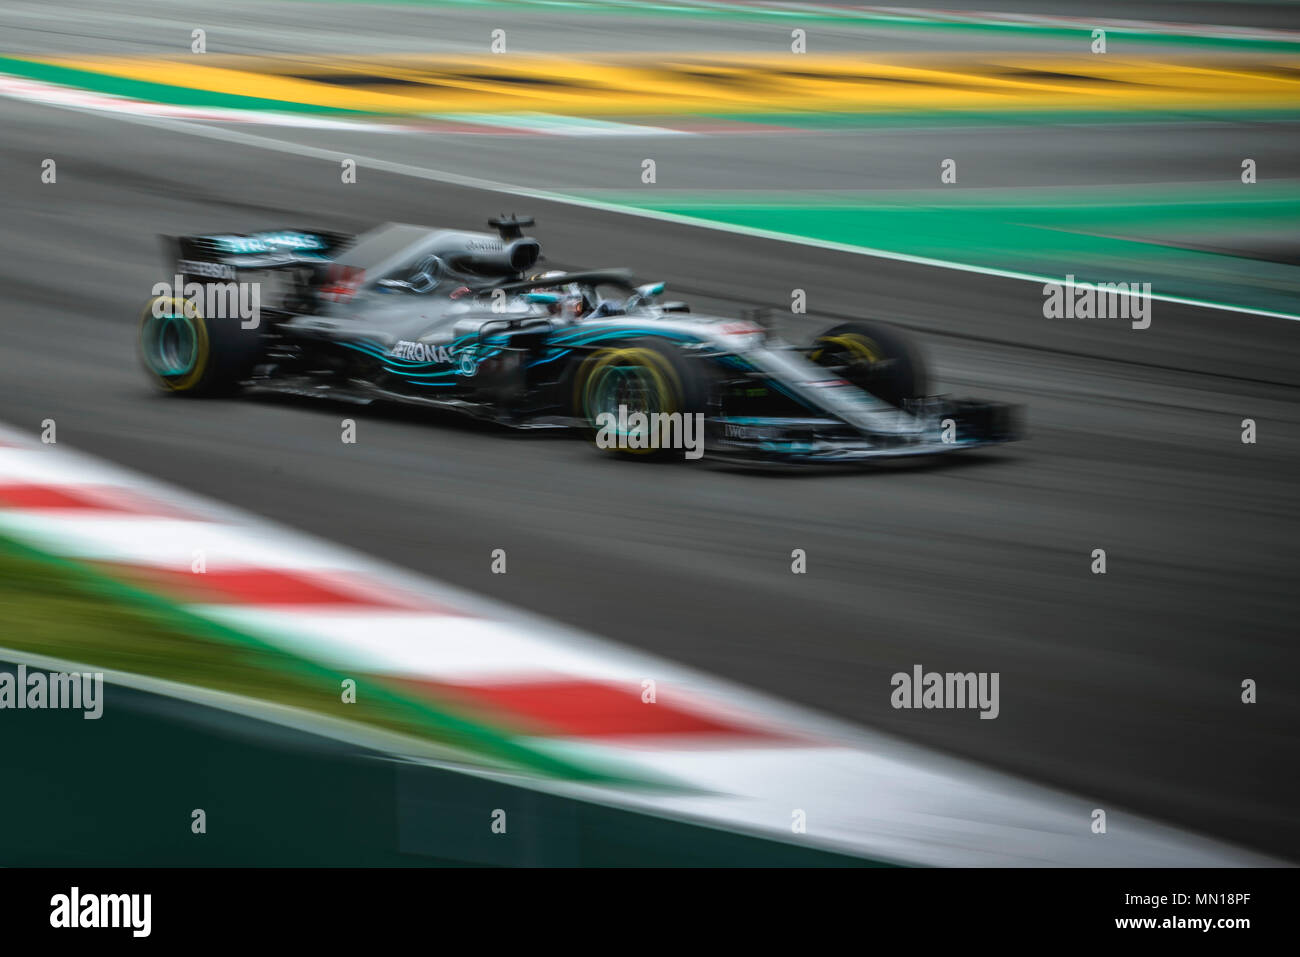 Barcelona, Spain. 13 May, 2018:  LEWIS HAMILTON (GBR) drives during the Spanish GP at Circuit de Barcelona - Catalunya in his Mercedes W09 EQ Power + Credit: Matthias Oesterle/Alamy Live News Stock Photo